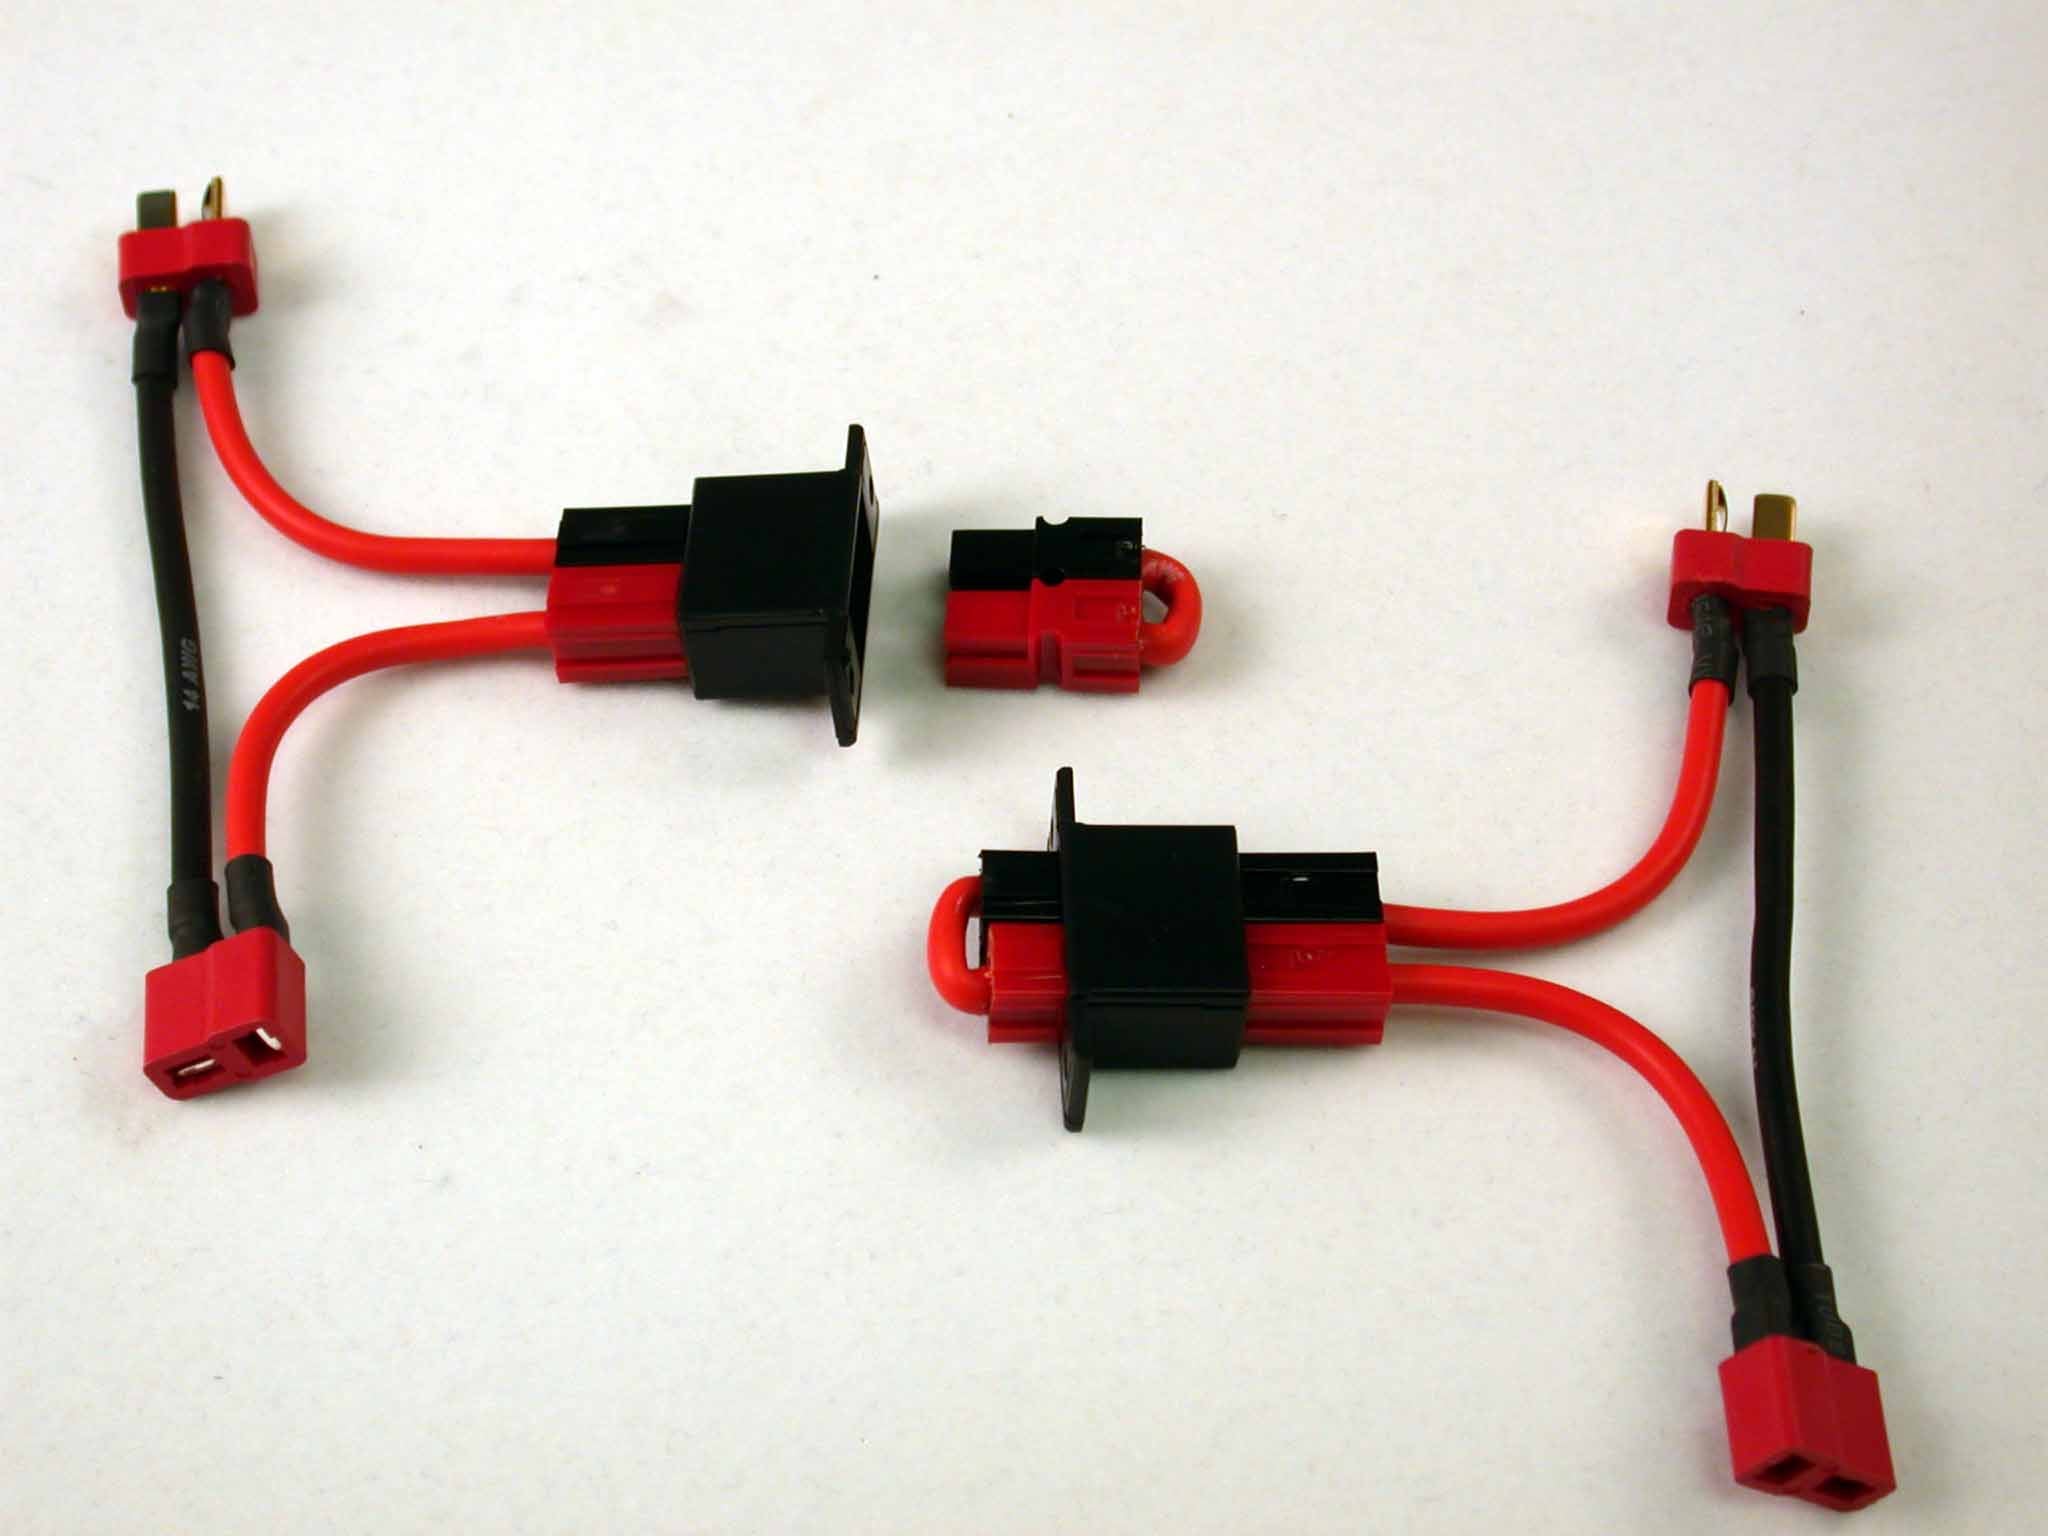 6973 Arming Switch, with EC3 connectors, AWG12 HD wire